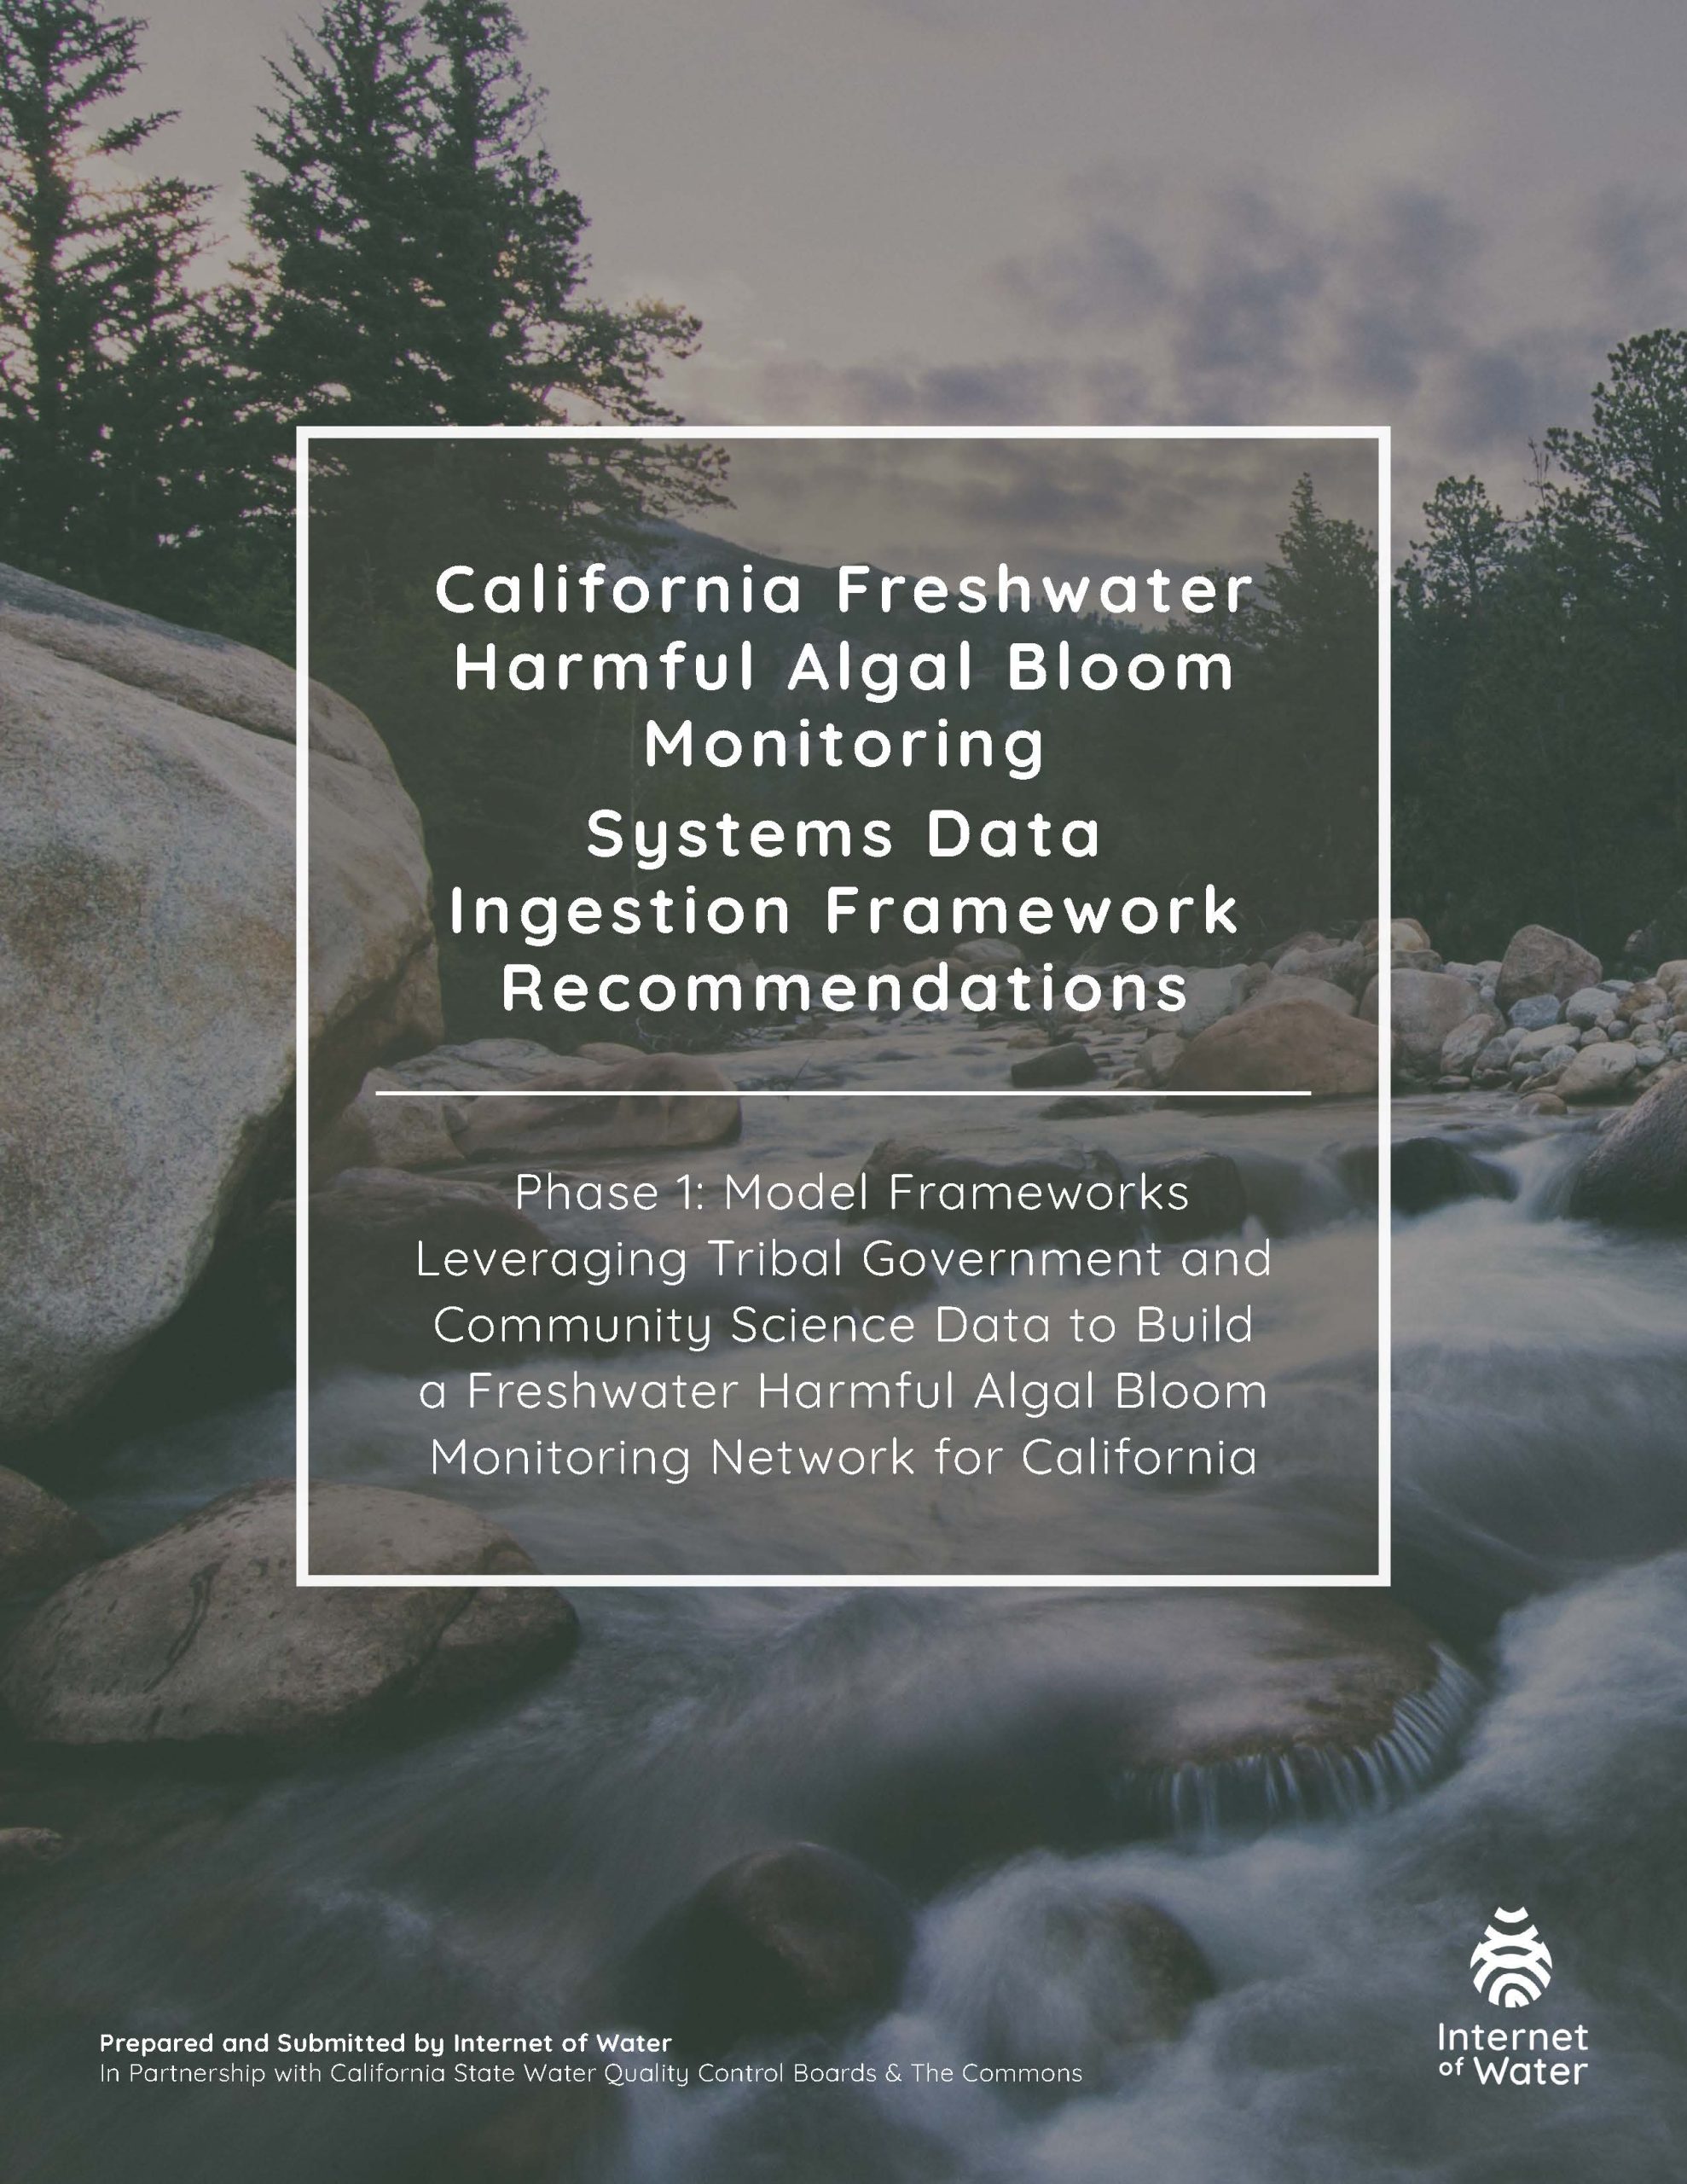 California Freshwater Harmful Algal Bloom Monitoring Systems Data Ingestion Framework and Recommendations